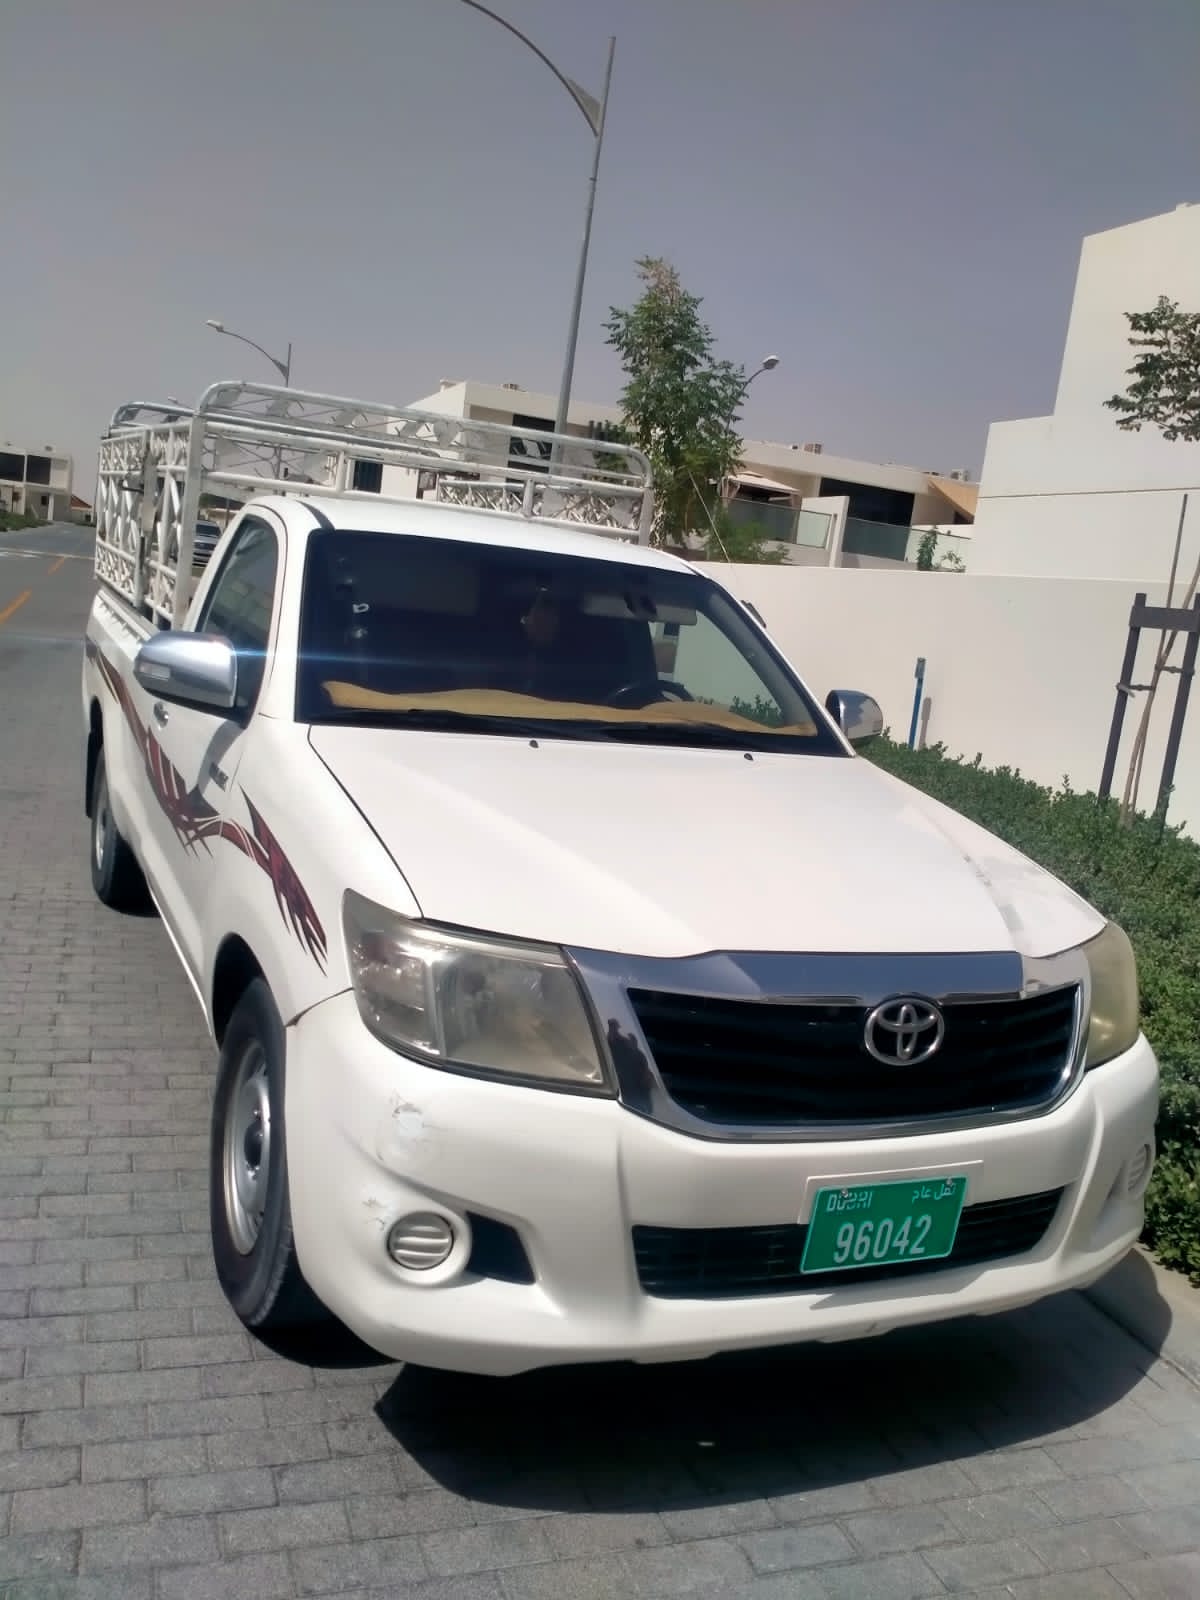 3 Ton Pickup For Rent in Dubai, Movers in Dubai Marina | Movers in Khor Fakkan | Movers And Packers In Umm Al Quwain | Movers and Packers in Sharjah | Movers And Packers In Al Ruwais | 3 Ton Pickup For Rent in Dubai | 1 Ton Pickup For Rent in Dubai